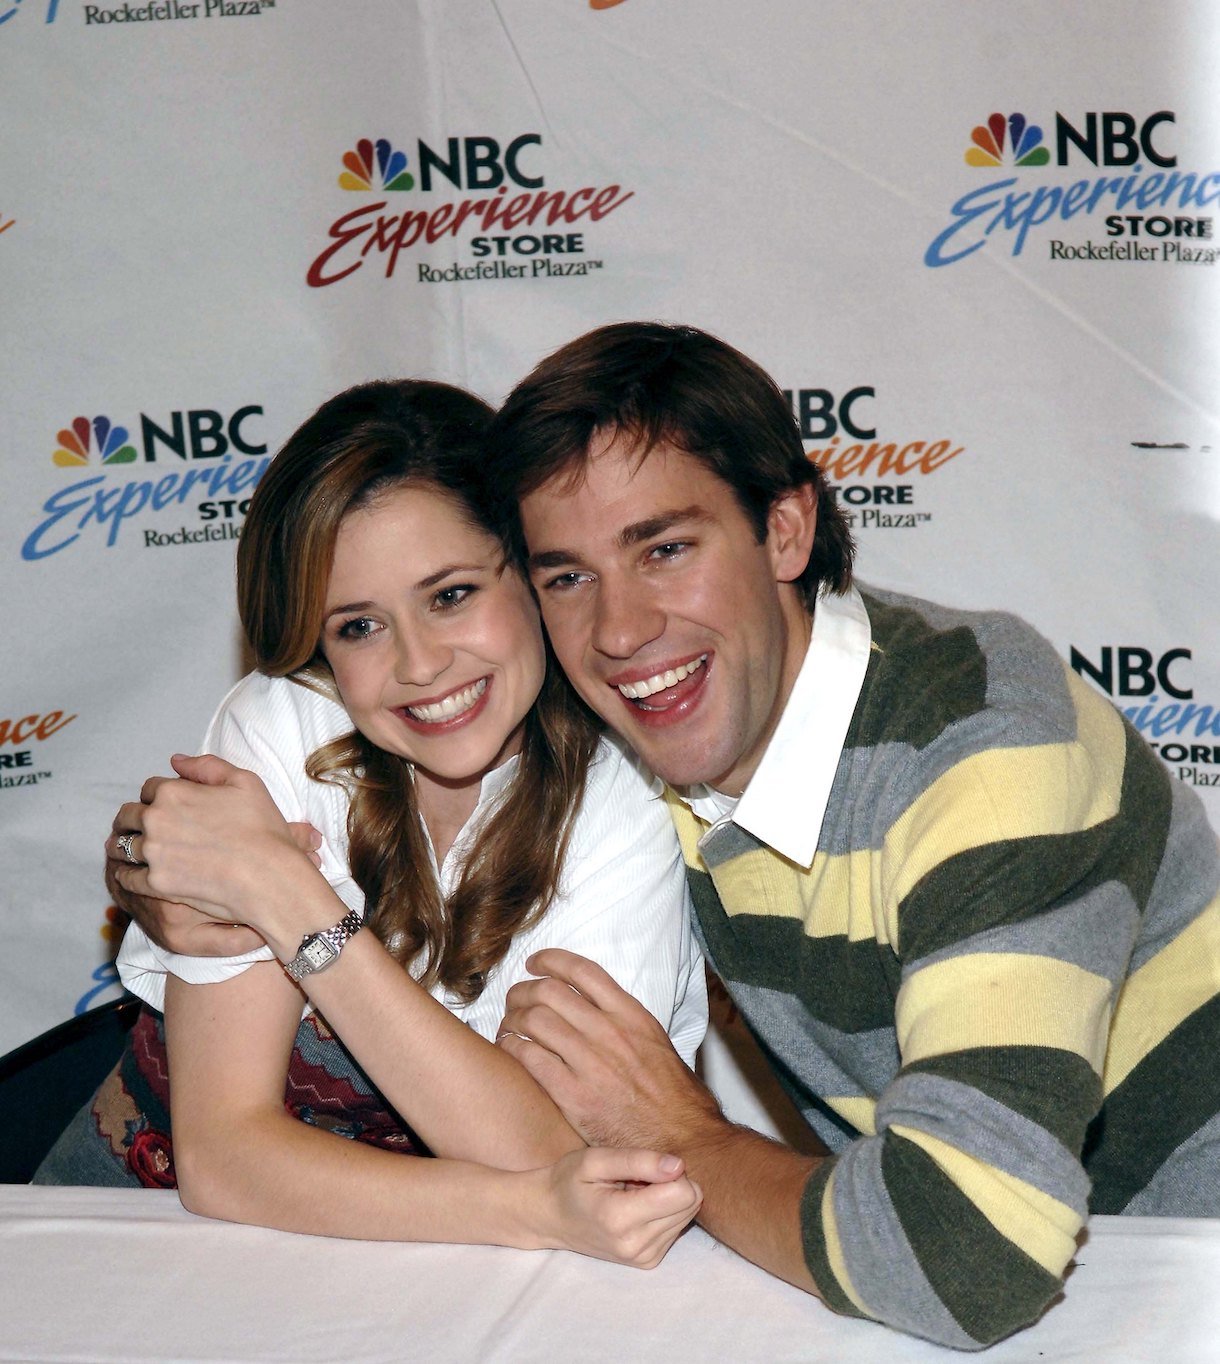 Actors John Krasinski (R) and Jenna Fischer pose at the NBC Experience store at "The Office" DVD release signing on September 21, 2006 in New York City